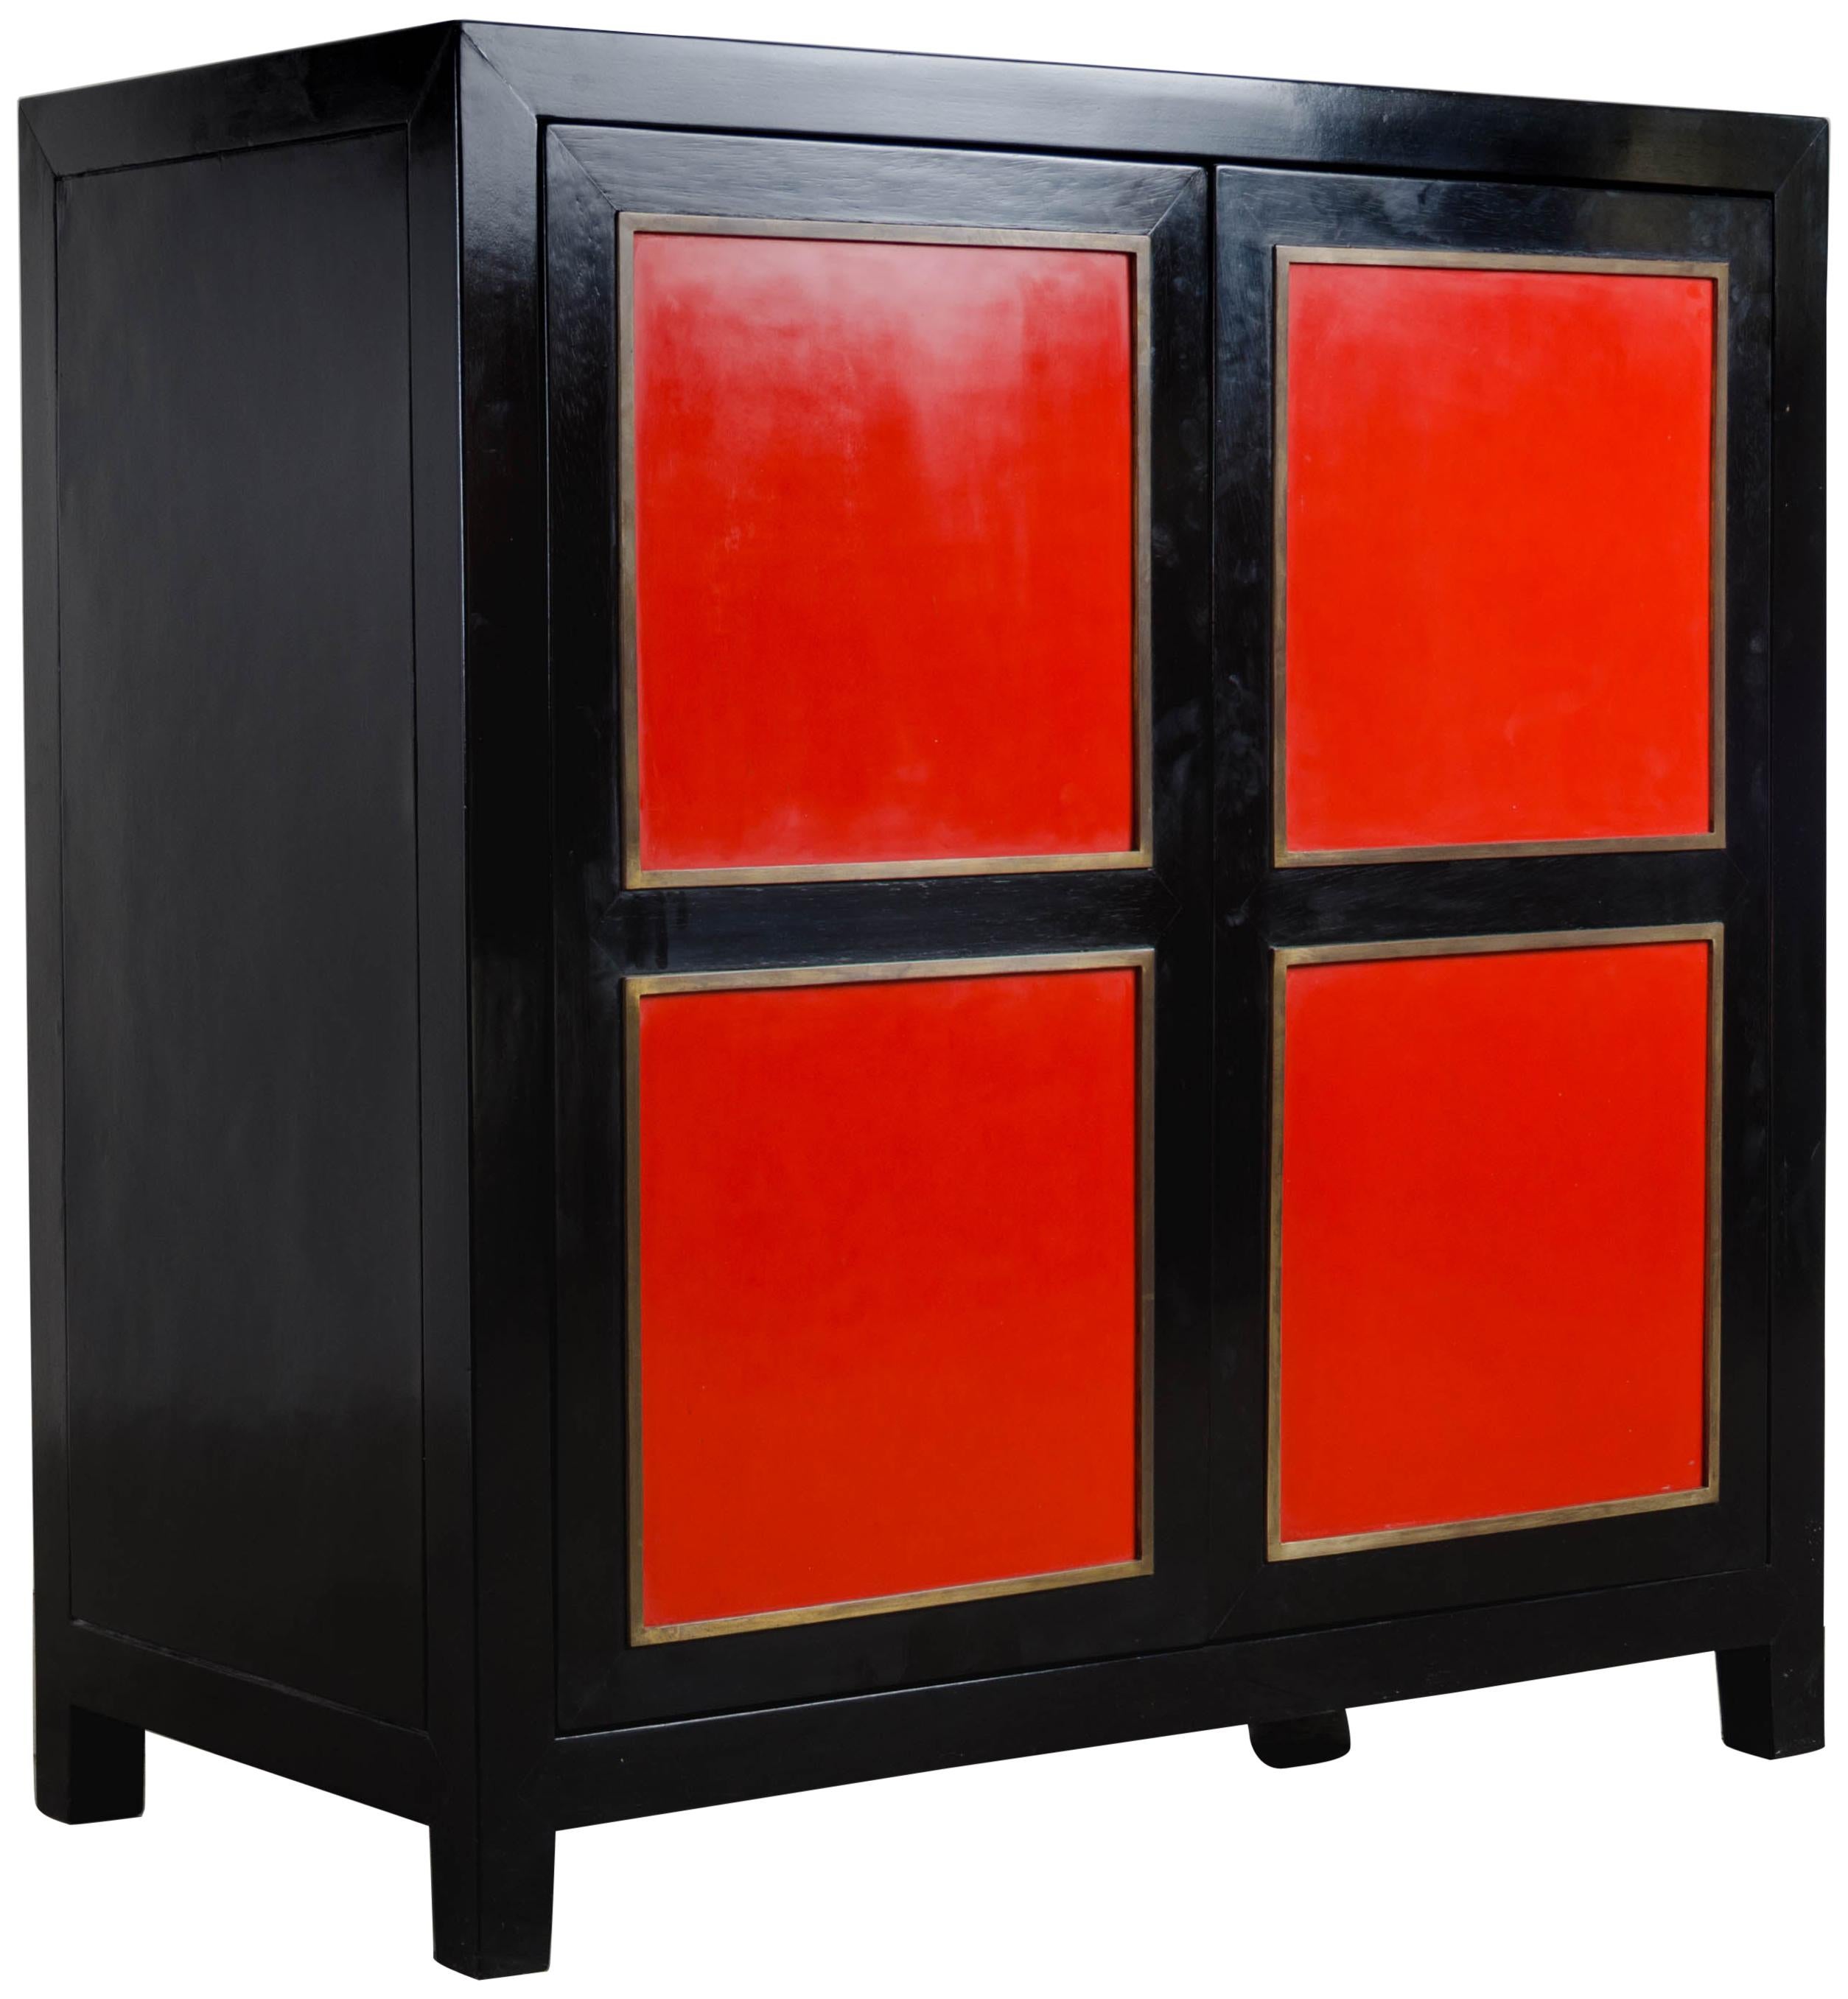 Four-Panel Red Lacquer Armoire with Brass Trim by Robert Kuo, Limited Editon